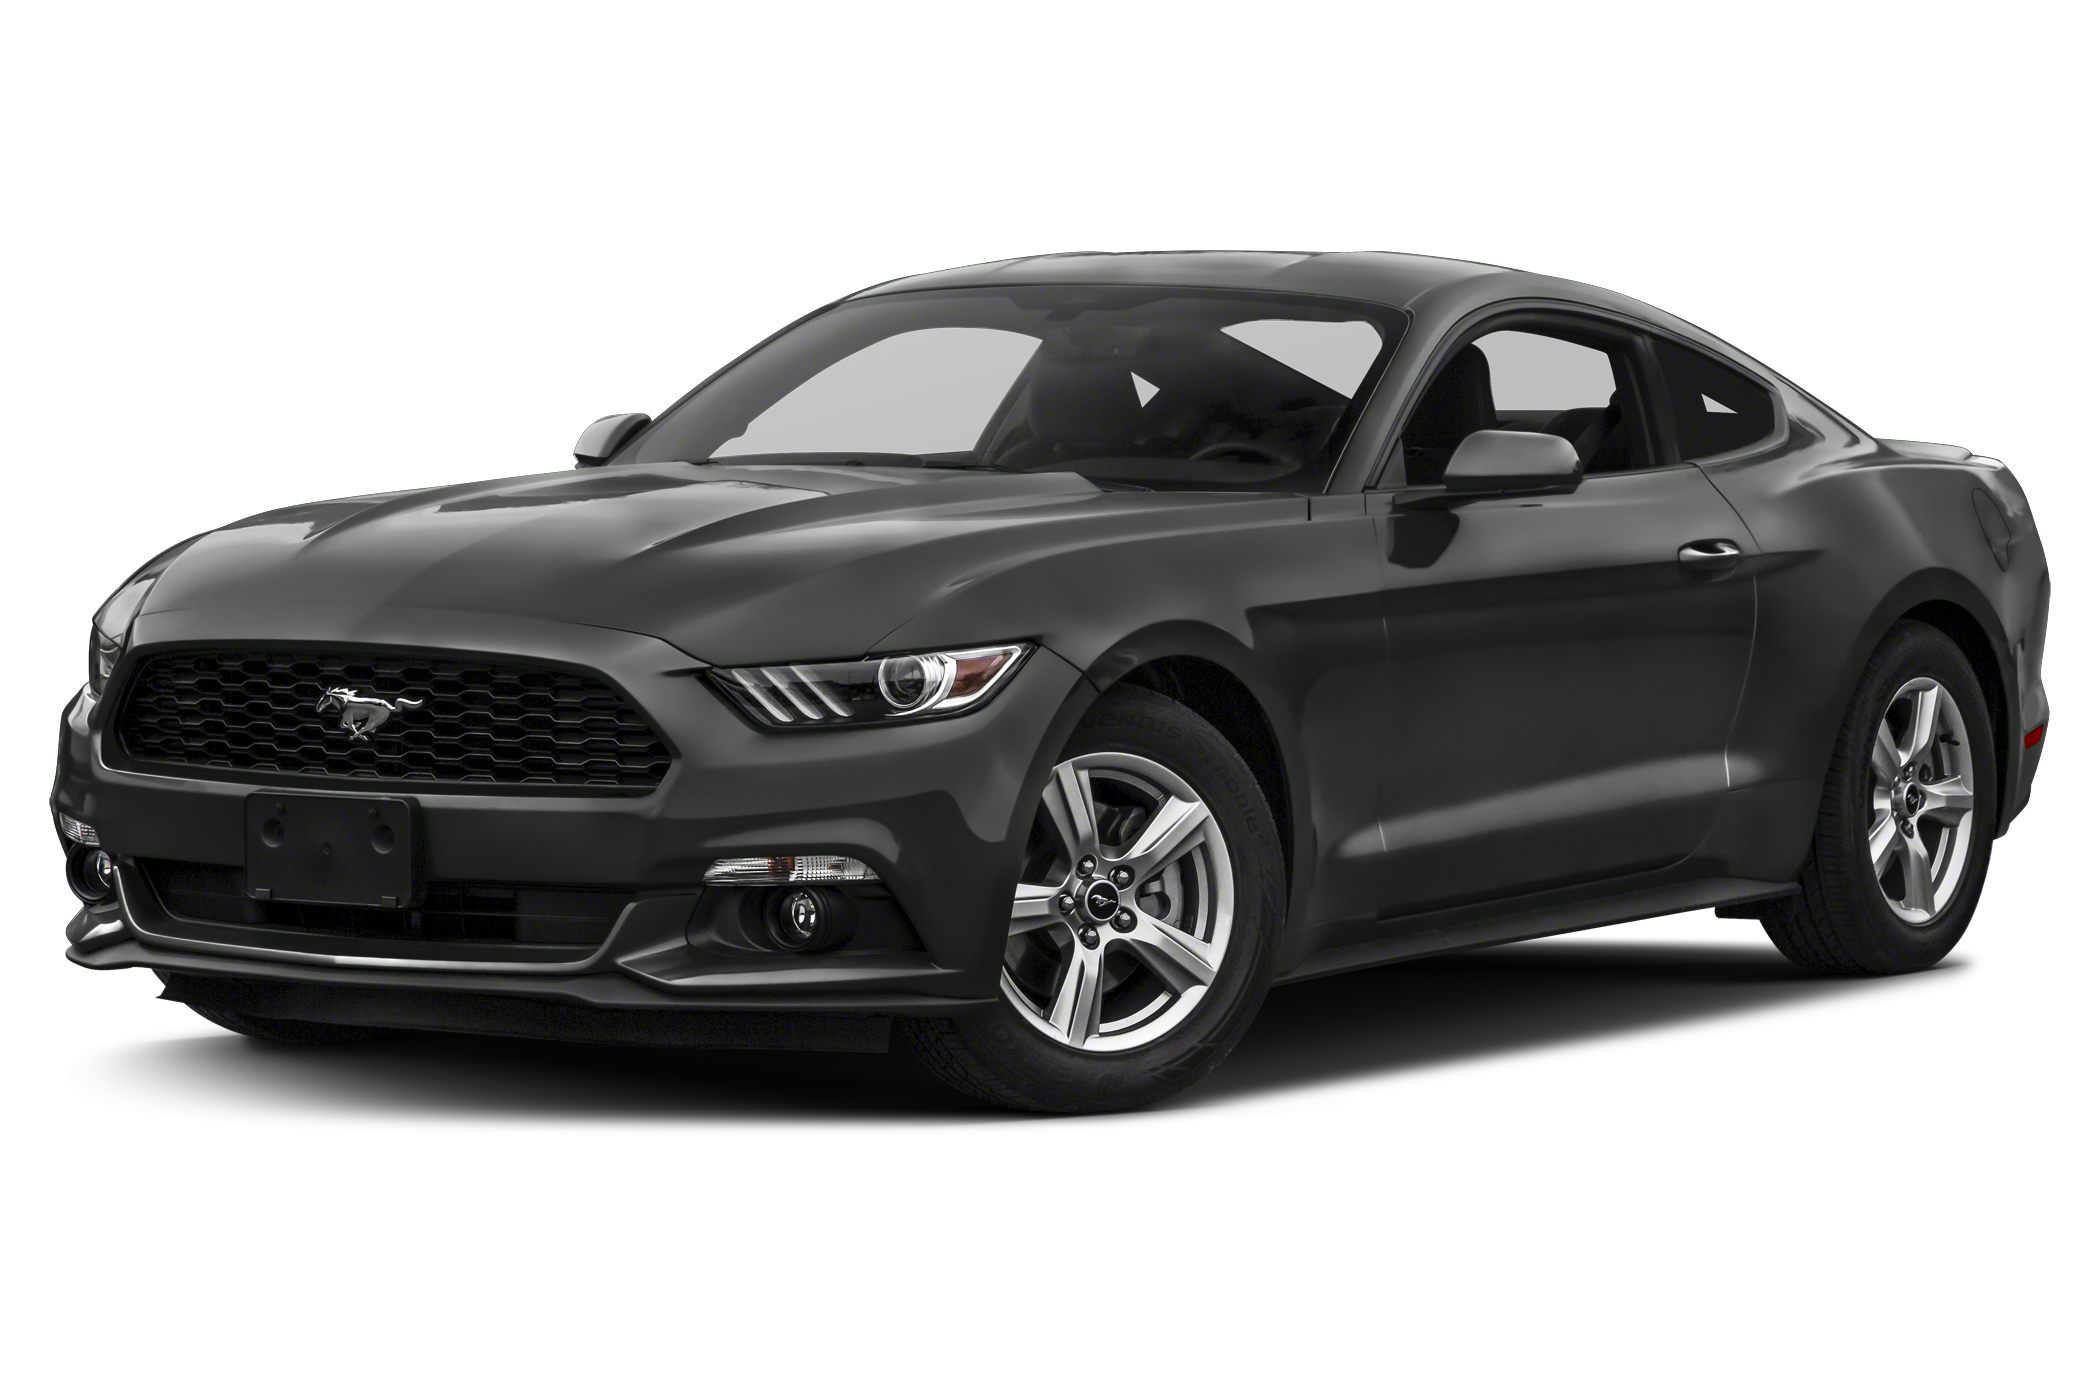 2017 Ford Mustang oem parts and accessories on sale